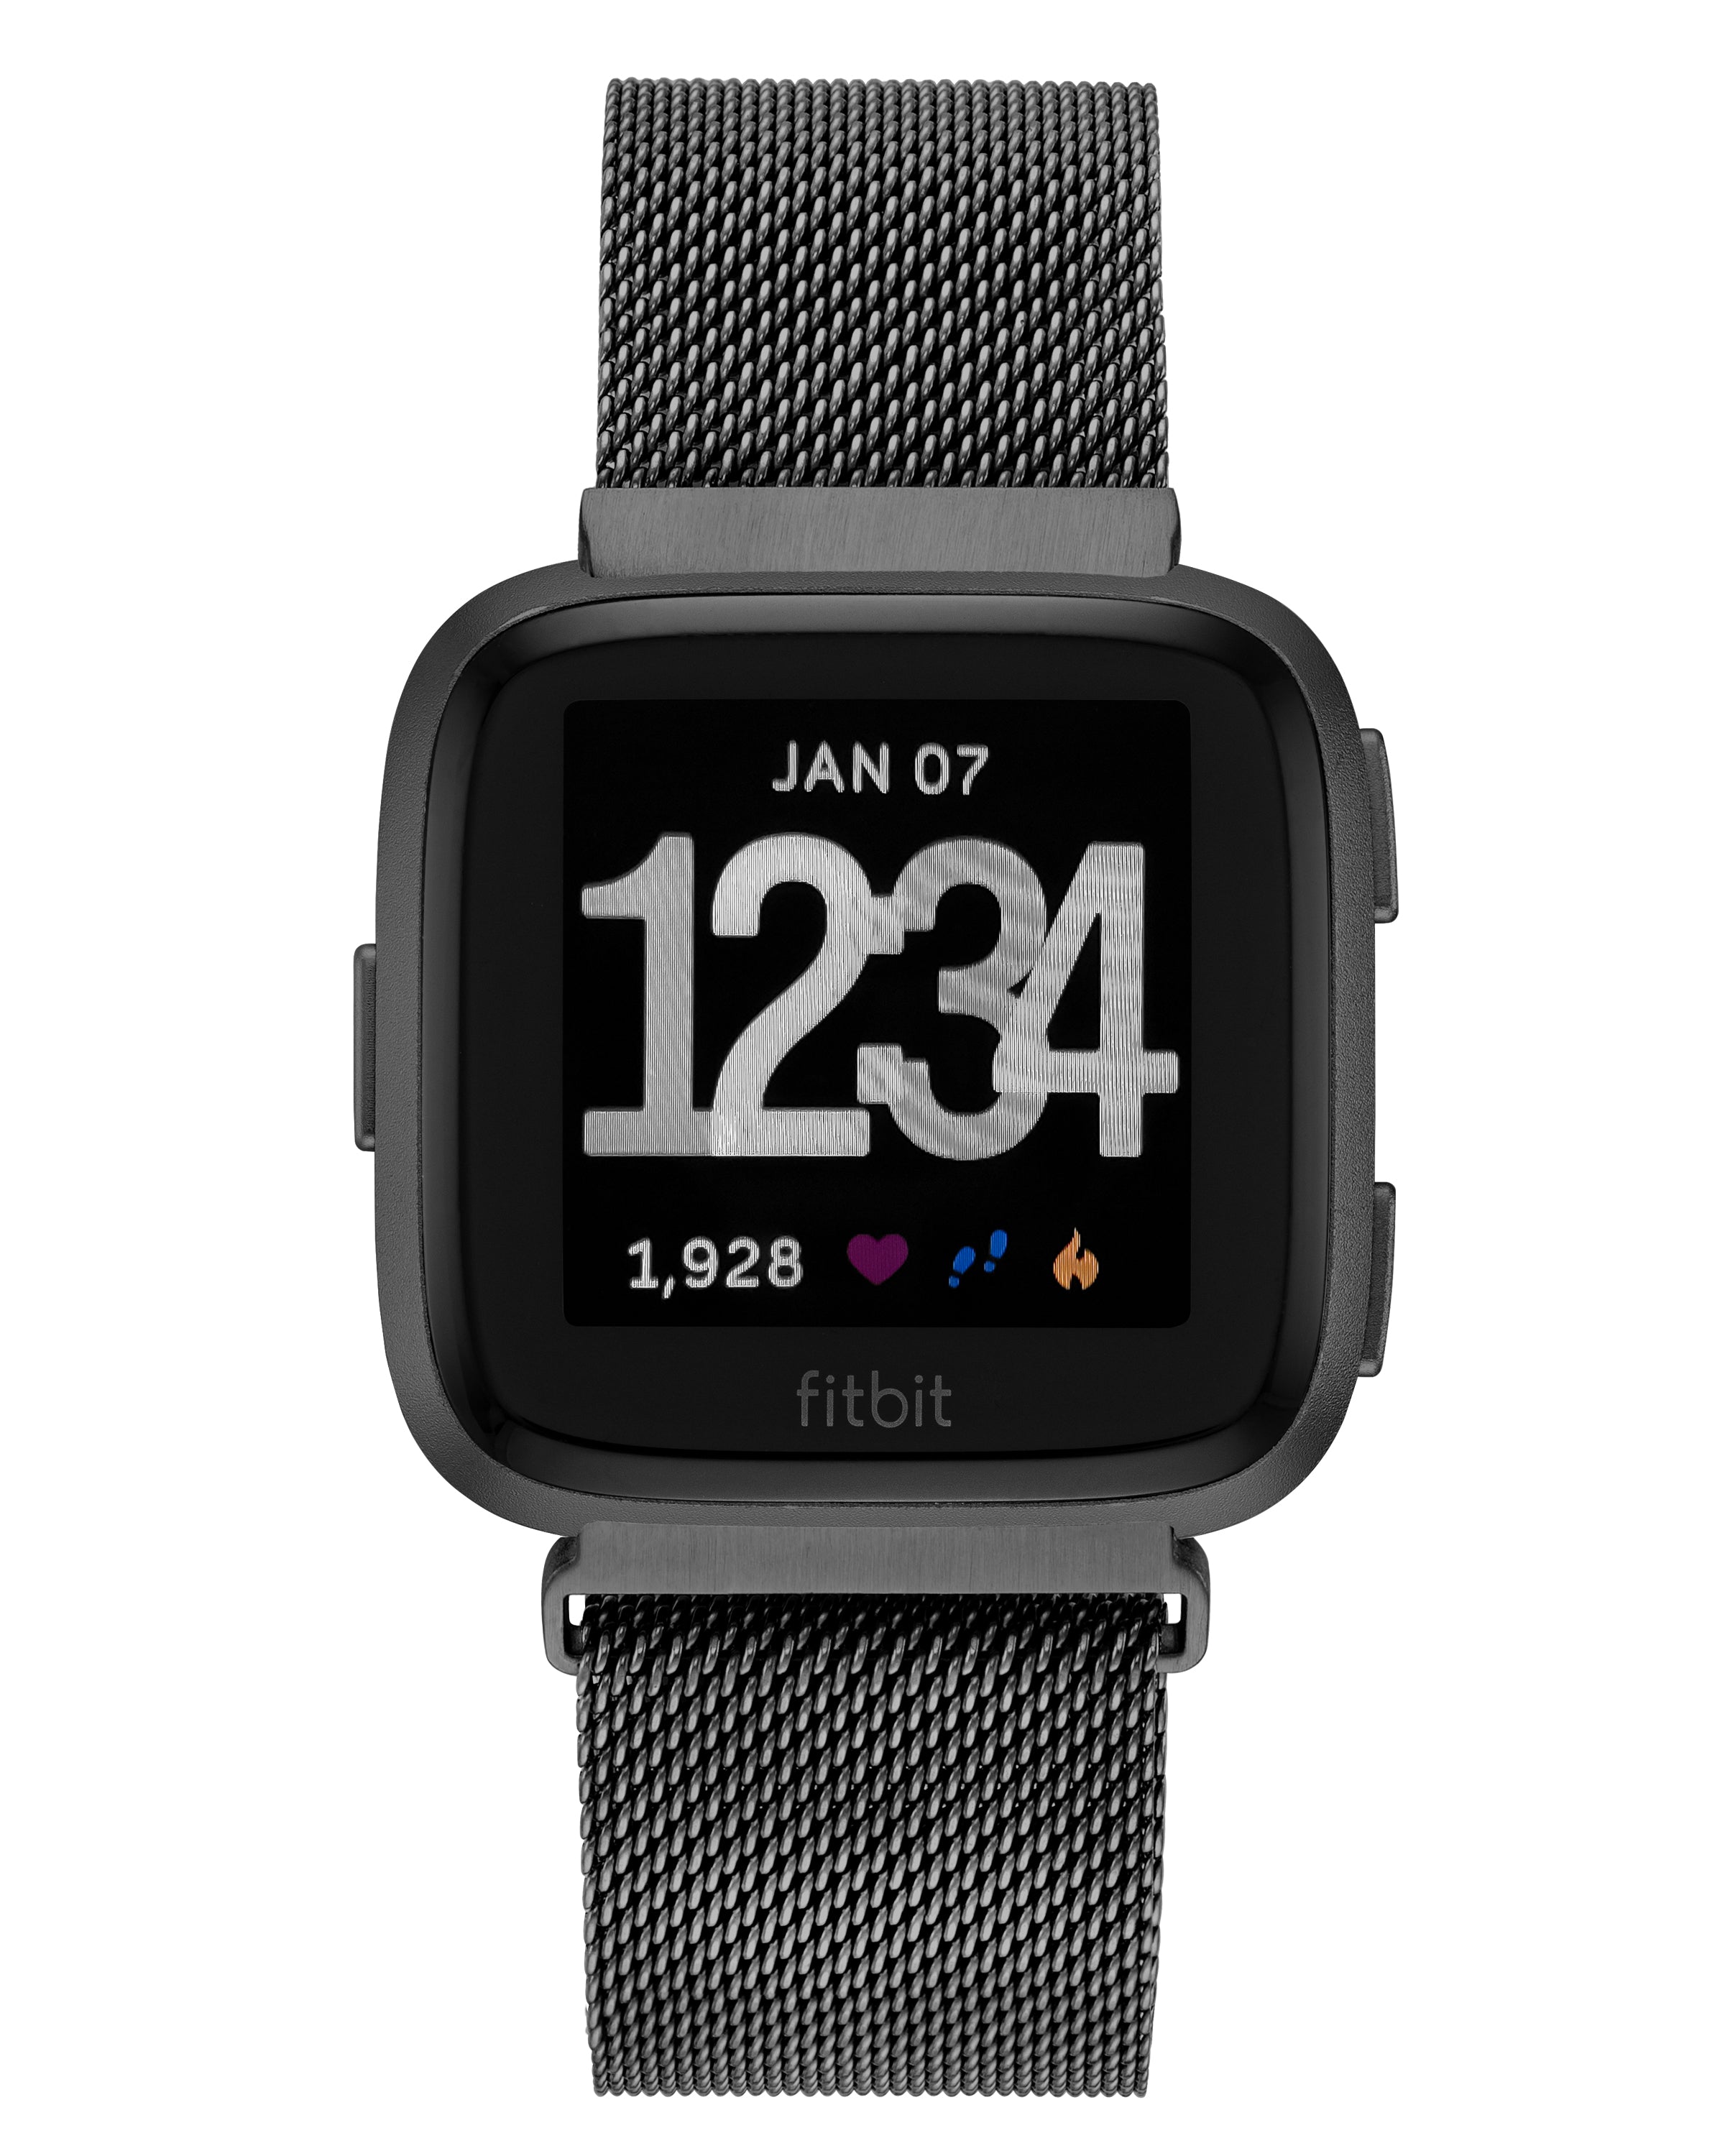 Stainless Steel Band for Fitbit Versa